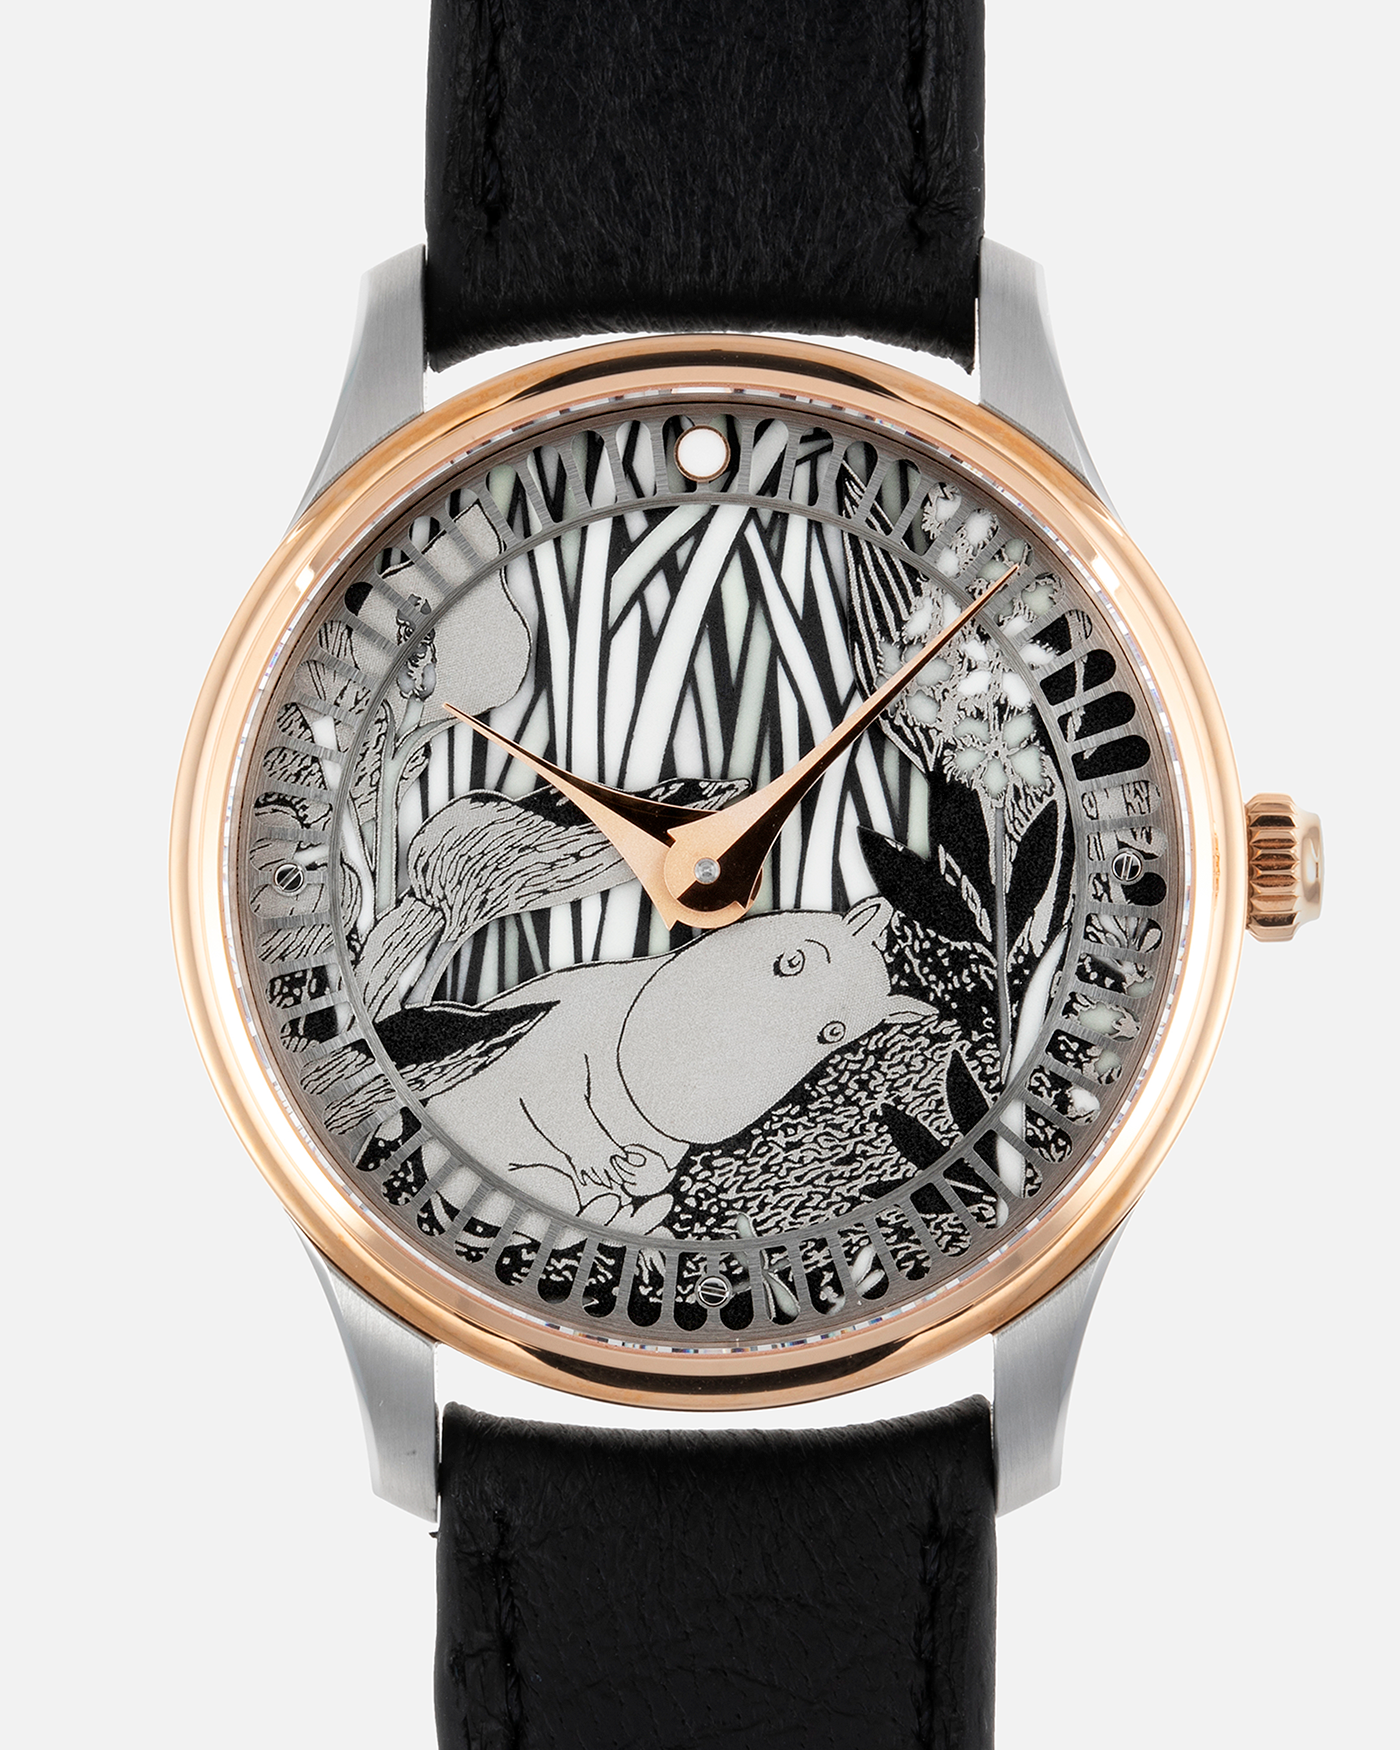 Brand: Sarpaneva S.U.F. Year: 2021 Model: Moomin For The Hour Glass Material: Stainless Steel, 18-carat Pink Gold Movement: Cal. Soprod A10, Self–Winding Case Diameter: 38.7mm Bracelet/Strap: SUF Sarpaneva Black Calf With Stainless Steel Tang Buckle